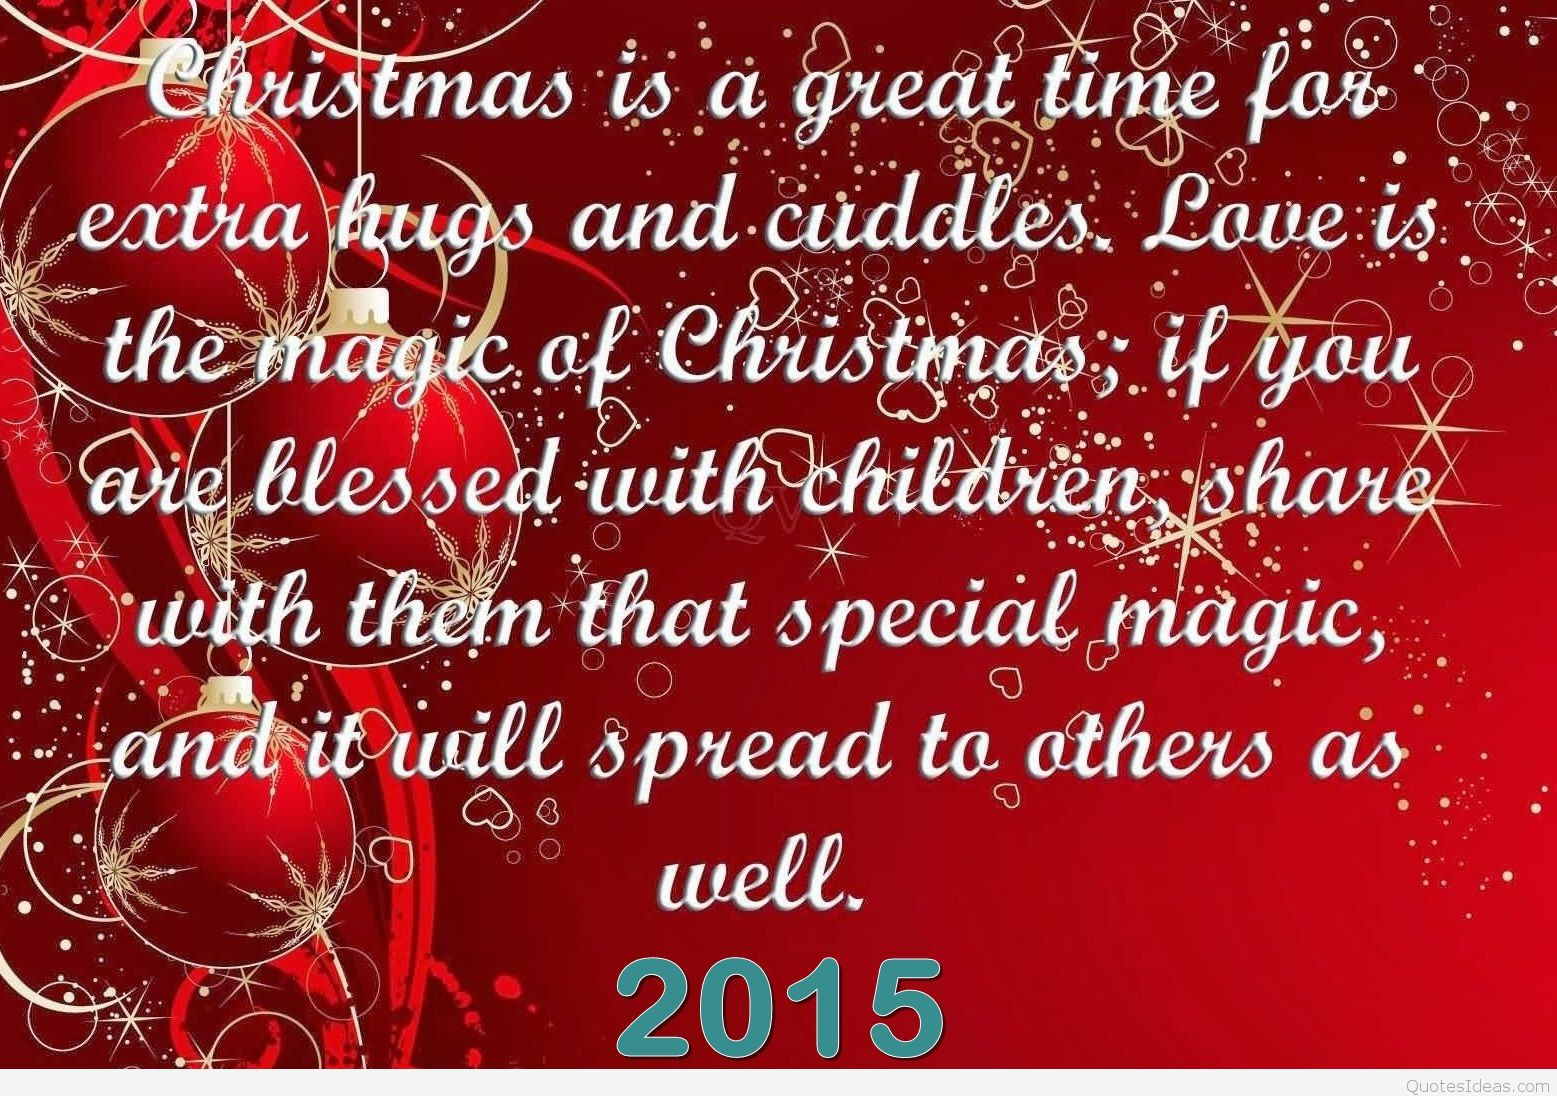 Merry Christmas Sister Quotes
 Merry Christmas Brother & Sisters Quotes Ideas